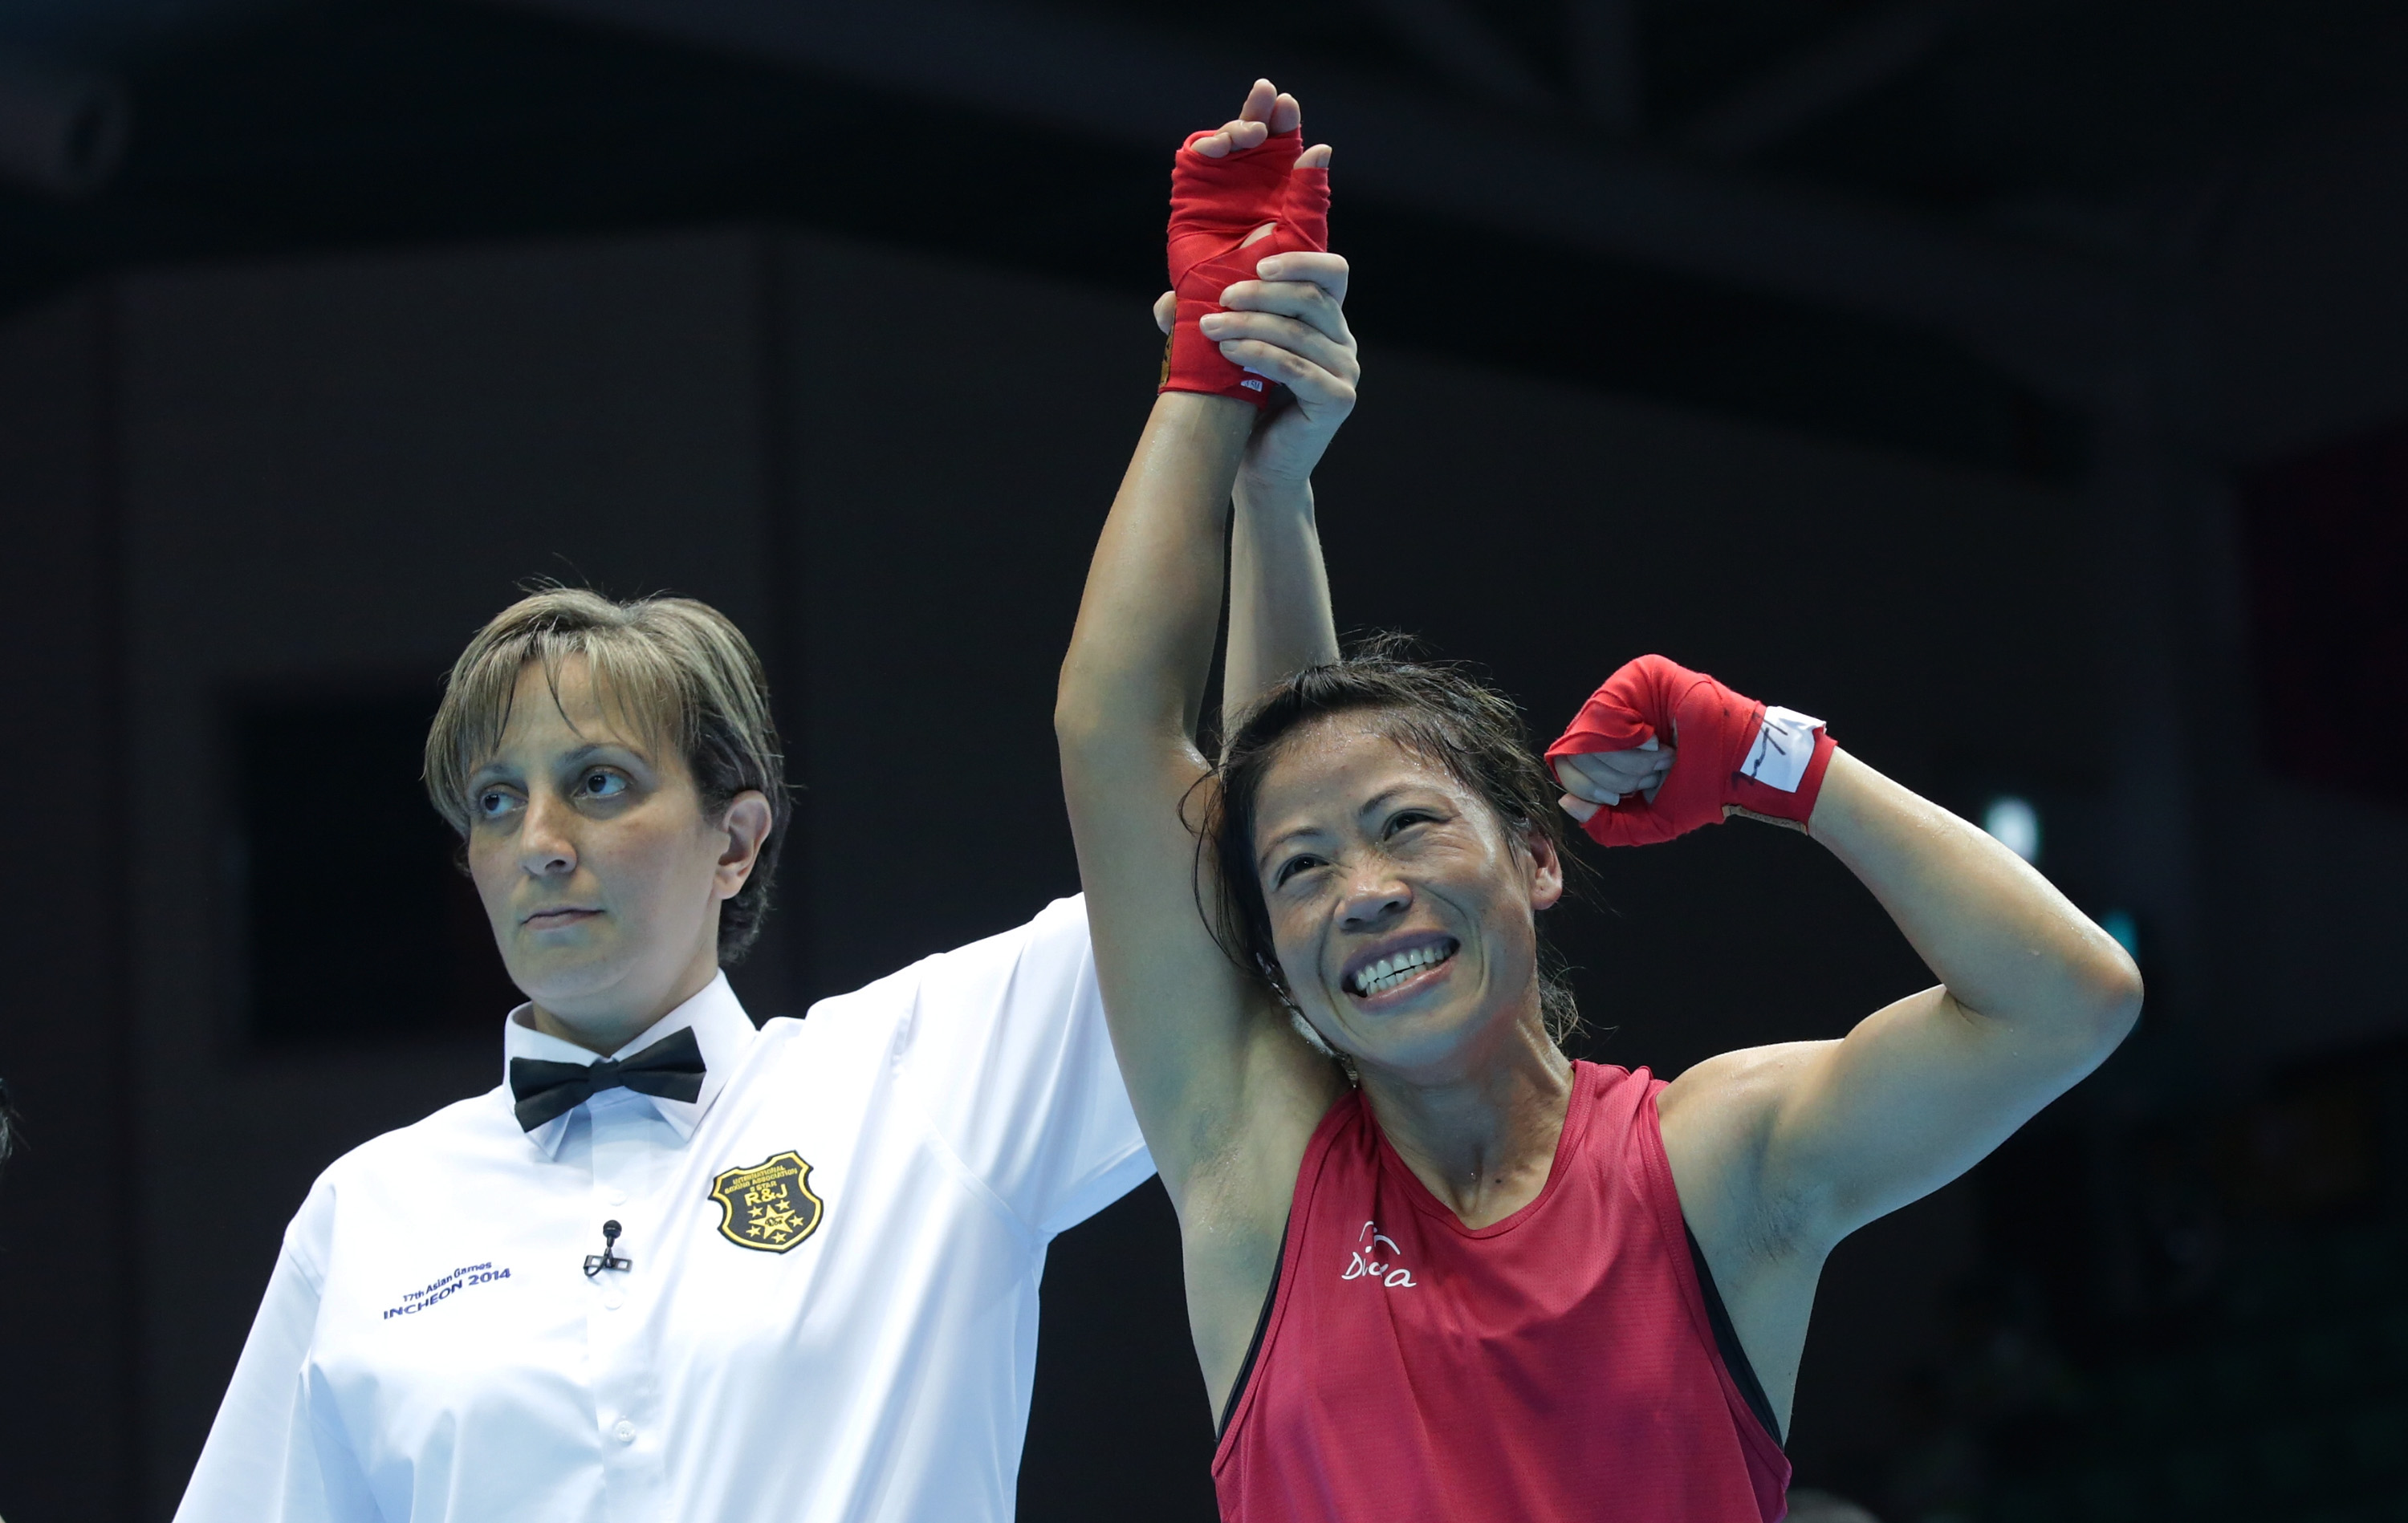 Silesian Open | Mary Kom secures Gold medal in 48kg category